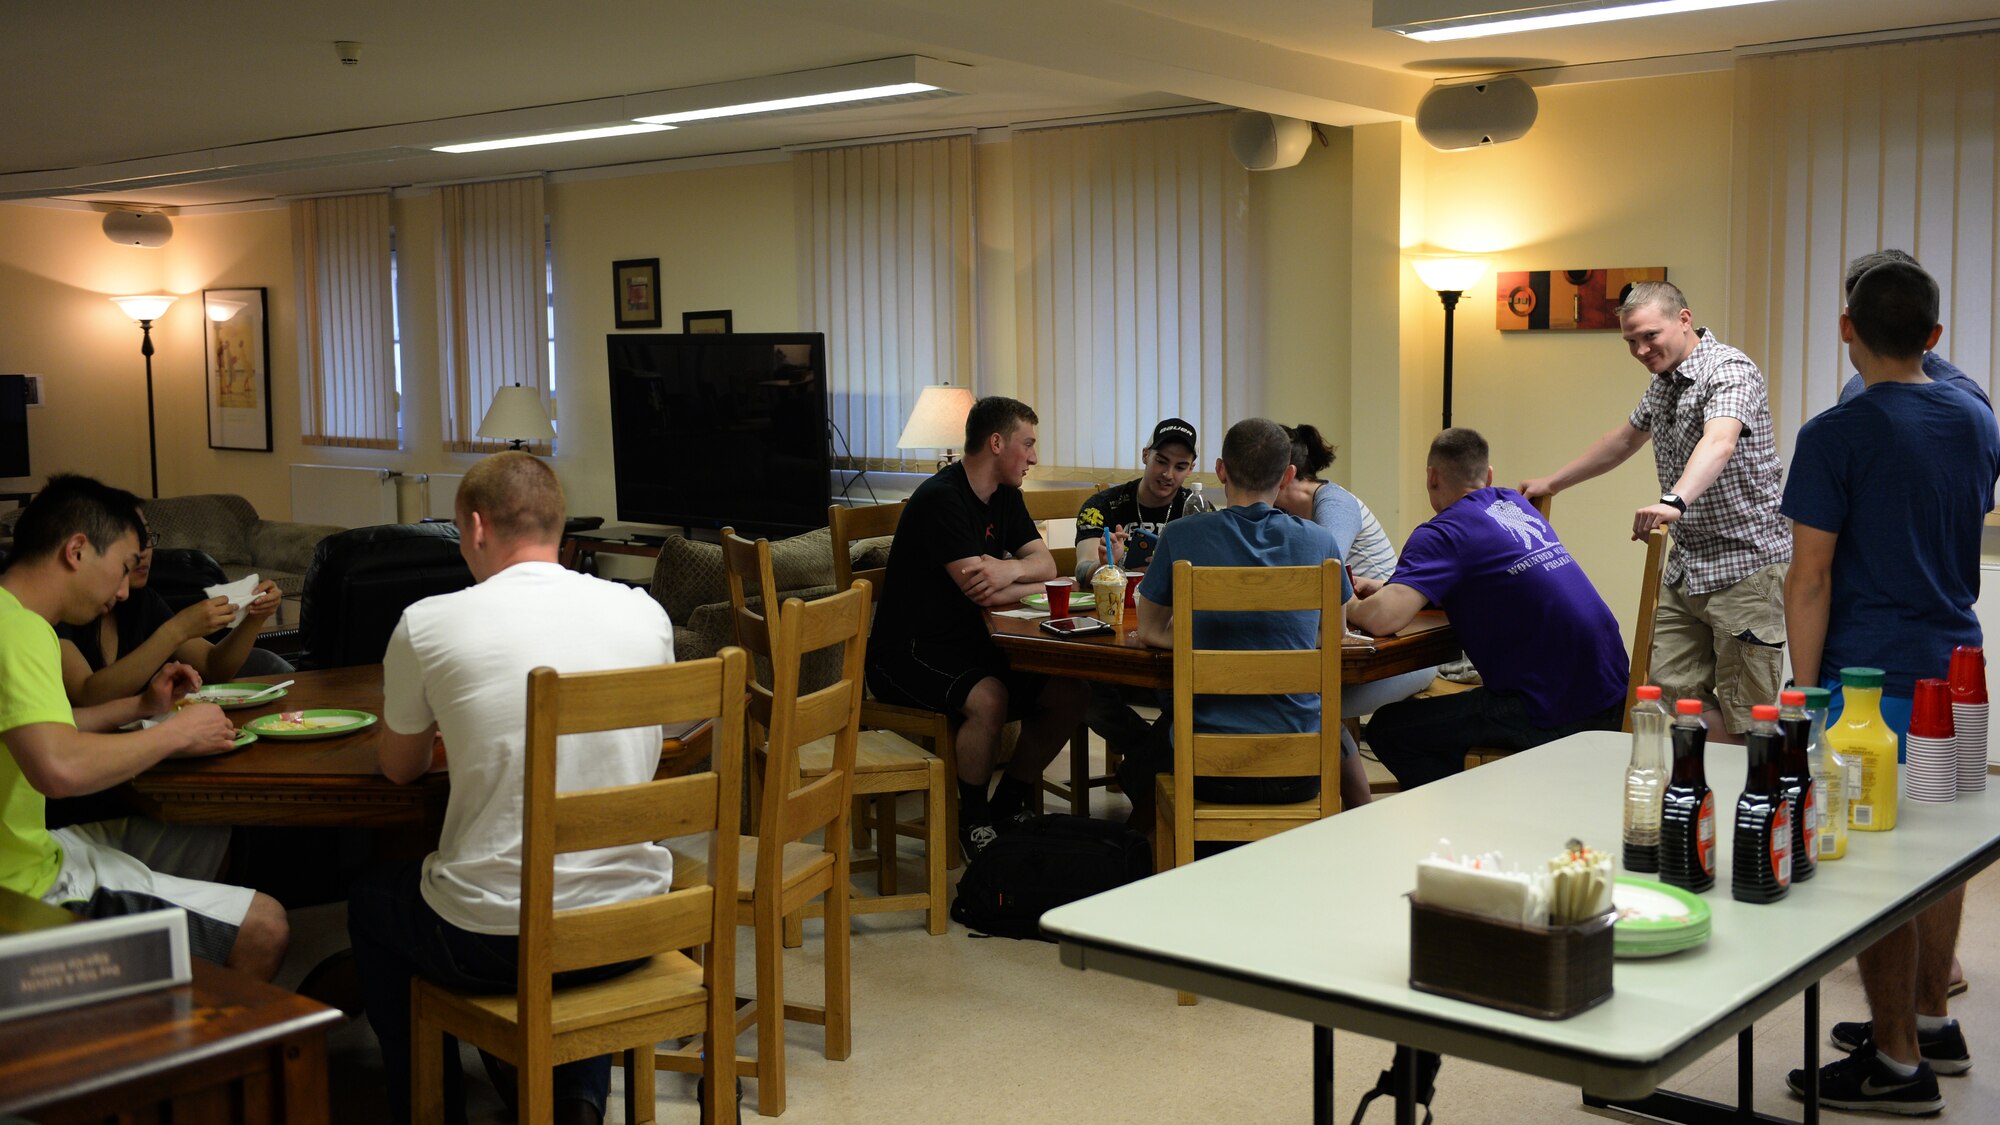 U.S. Air Force Airmen hang out April 10, 2015, at the Coffee Mill on Spangdahlem Air Base, Germany. The Coffee Mill is a facility run by the 52nd Fighter Wing Chapel that is available for use to all Airmen but is primarily focused for Airmen living in the dorms. (U.S. Air Force photo by Senior Airman Dylan Nuckolls/Released)